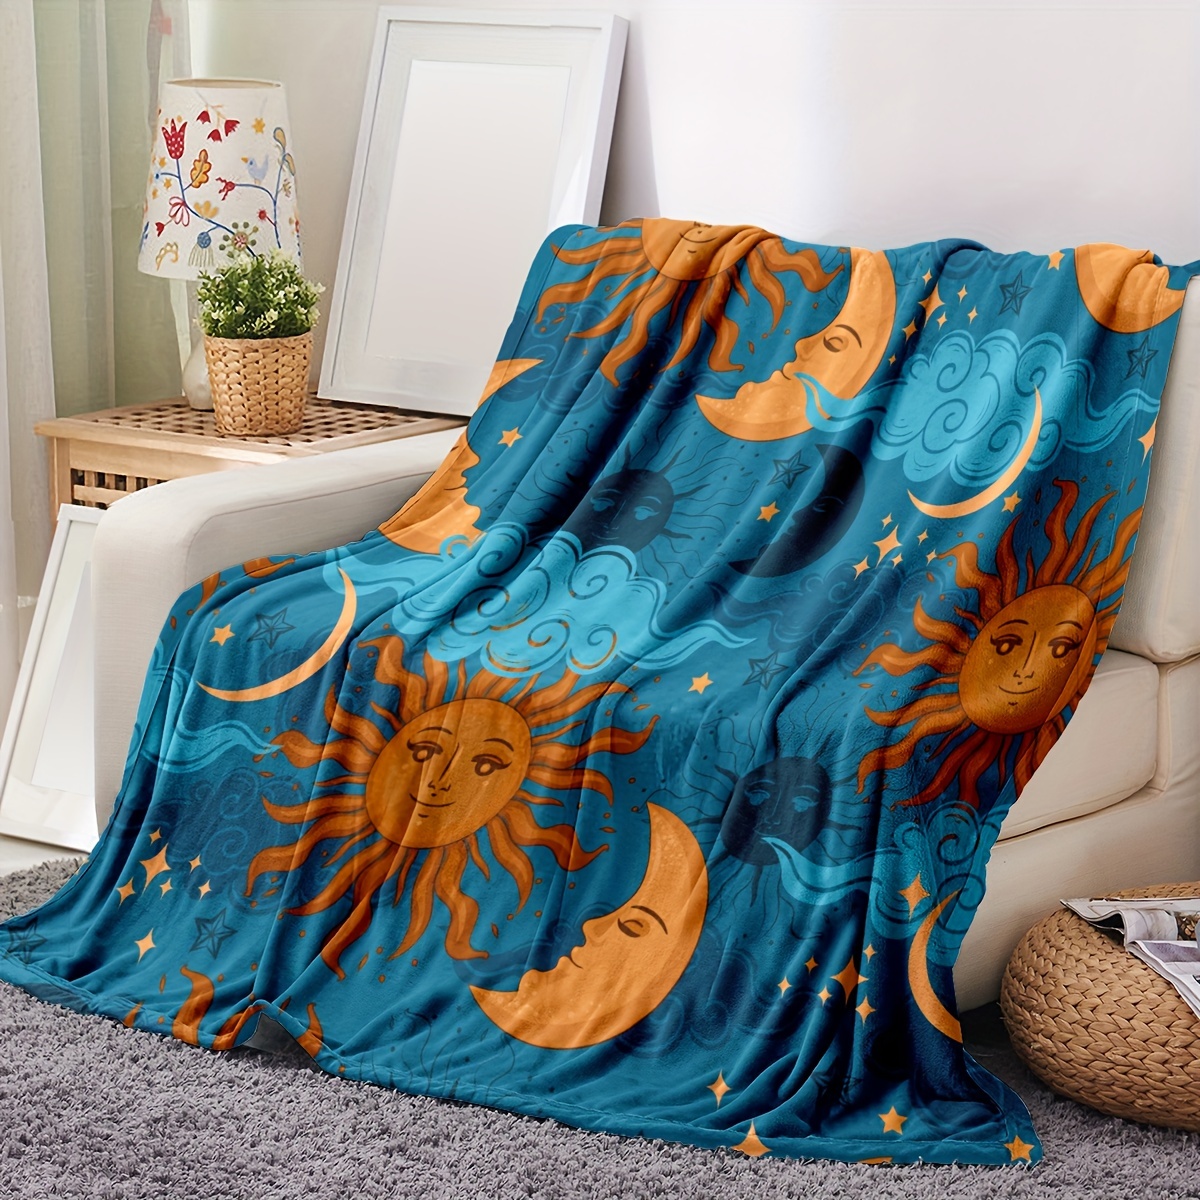 Printed Flannel Blanket Soft Throw for Bed Couch Sofa, Blue Plaid